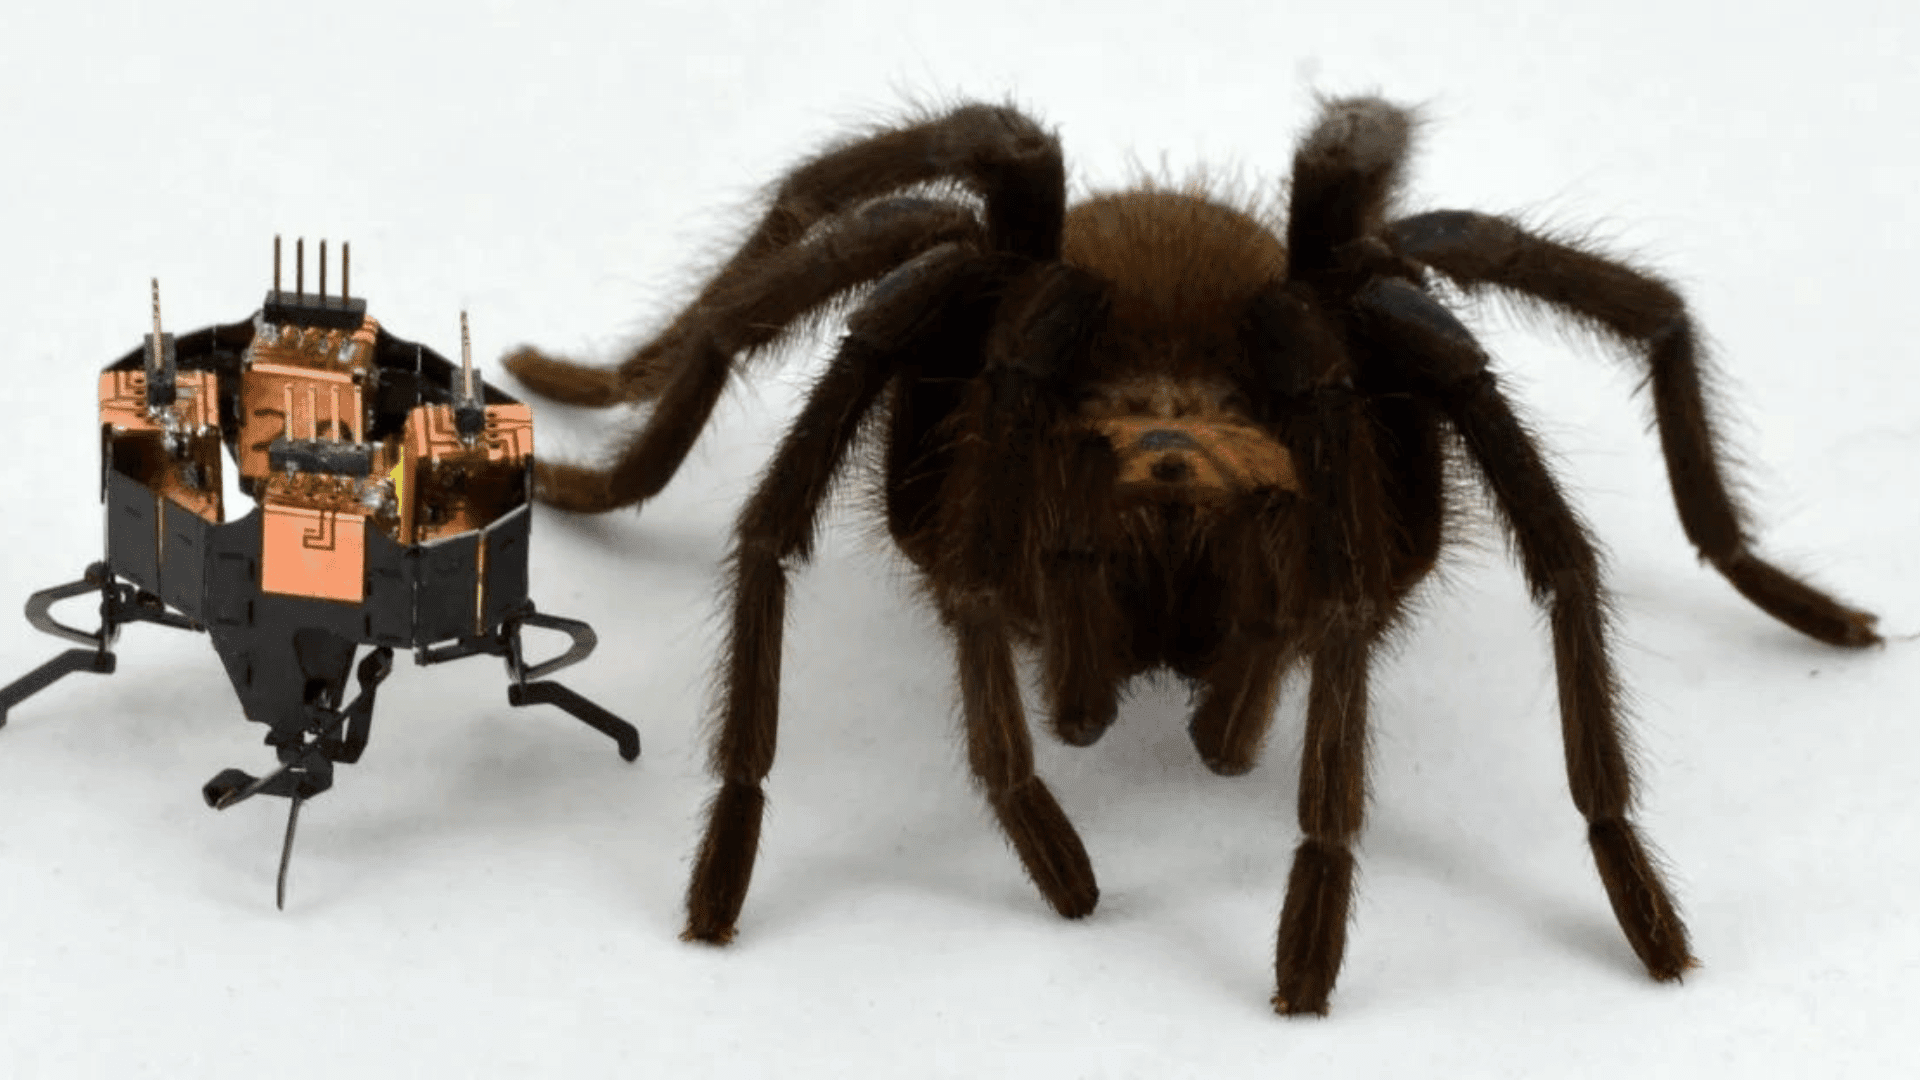 A robot called mCLARI designed by engineers at CU Boulder poses next to a spider. (Credit: Heiko Kabutz)